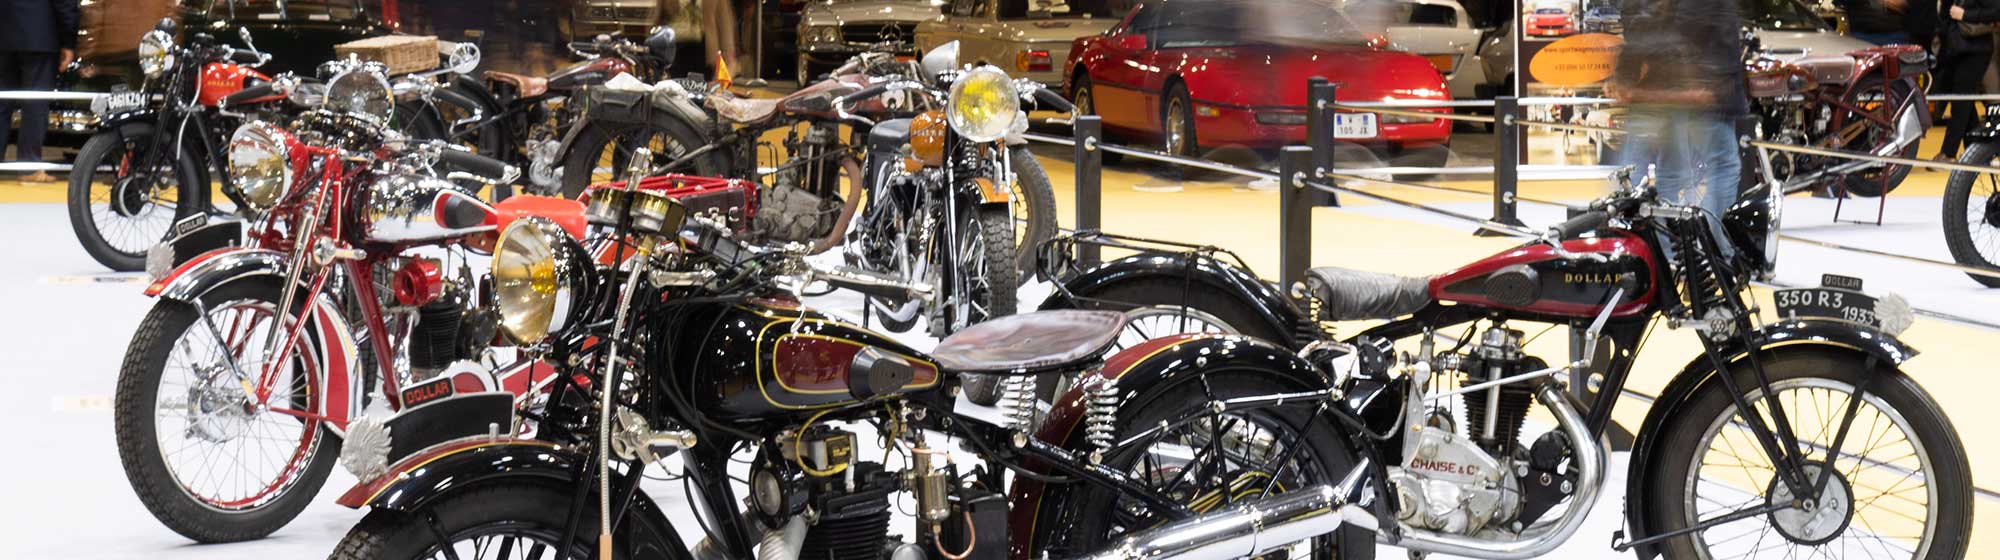 Vintage motorbikes in an exhibition area at Retromobile